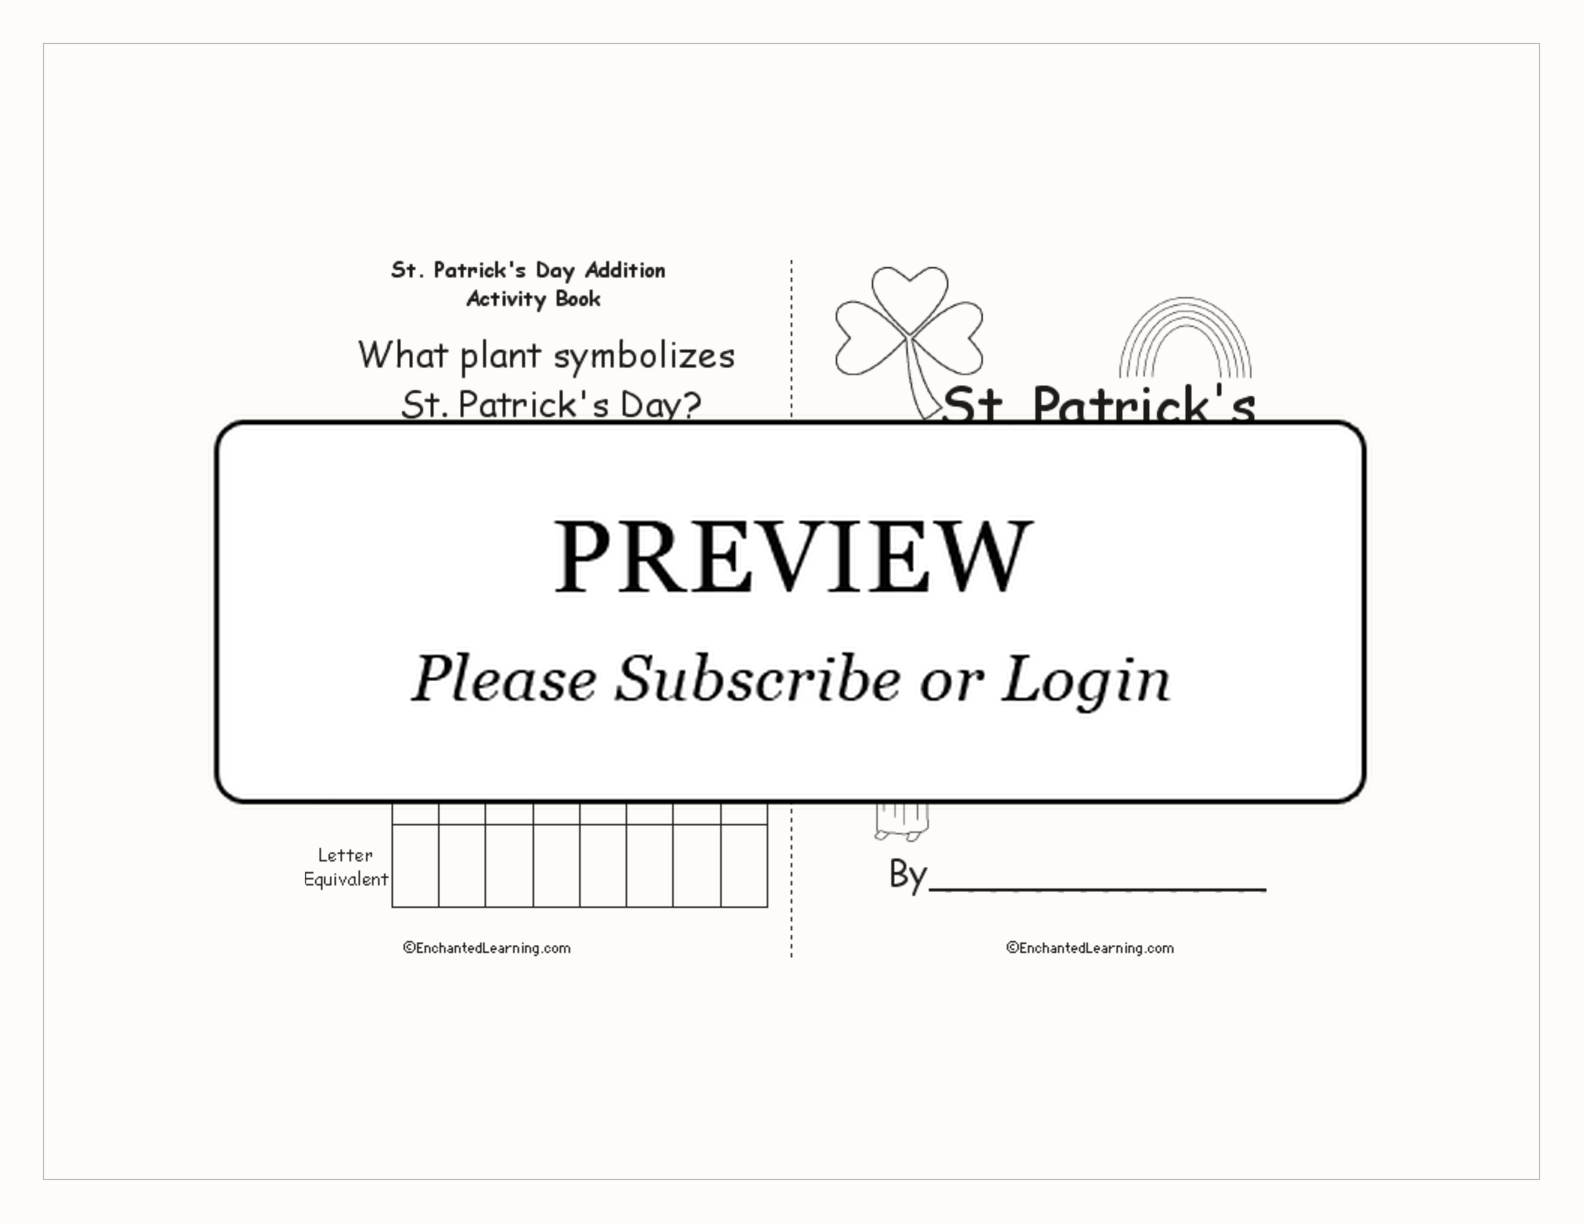 St. Patrick's Day Addition Activity Book interactive printout page 1